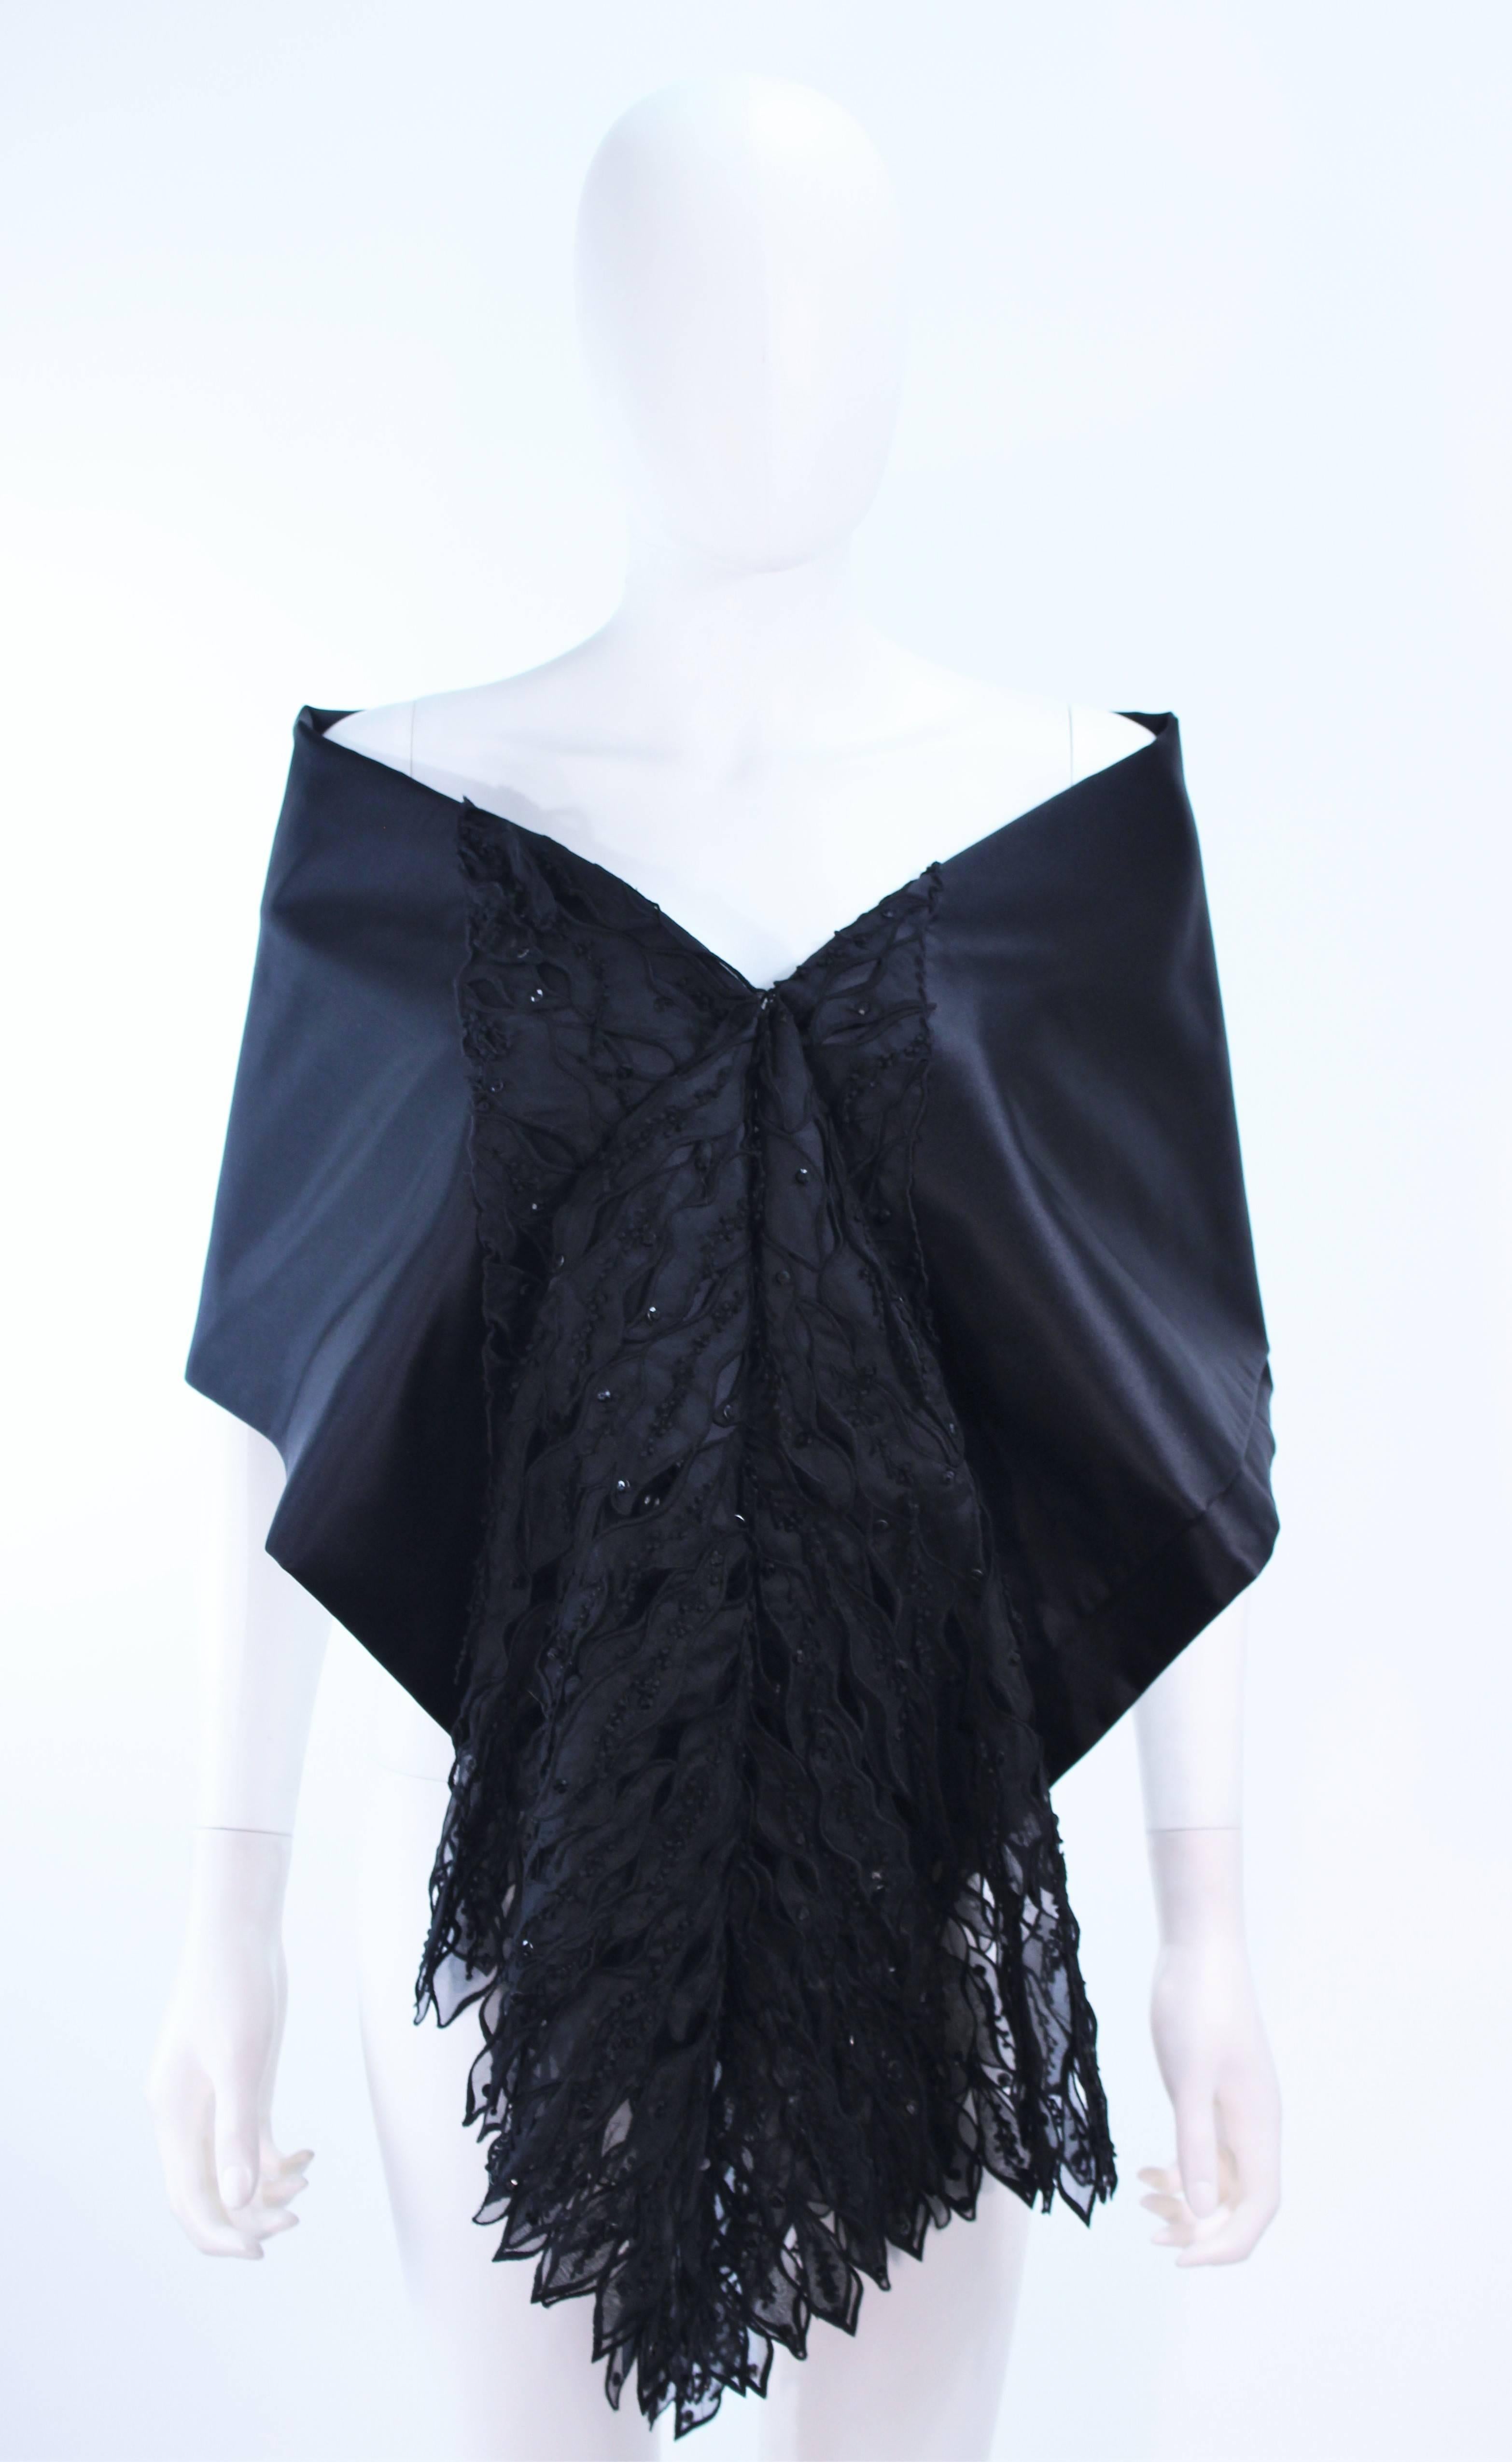 Vintage 1960's Black Silk Jersey Gown with Floral Applique & Rhinestones Size 4 For Sale 5